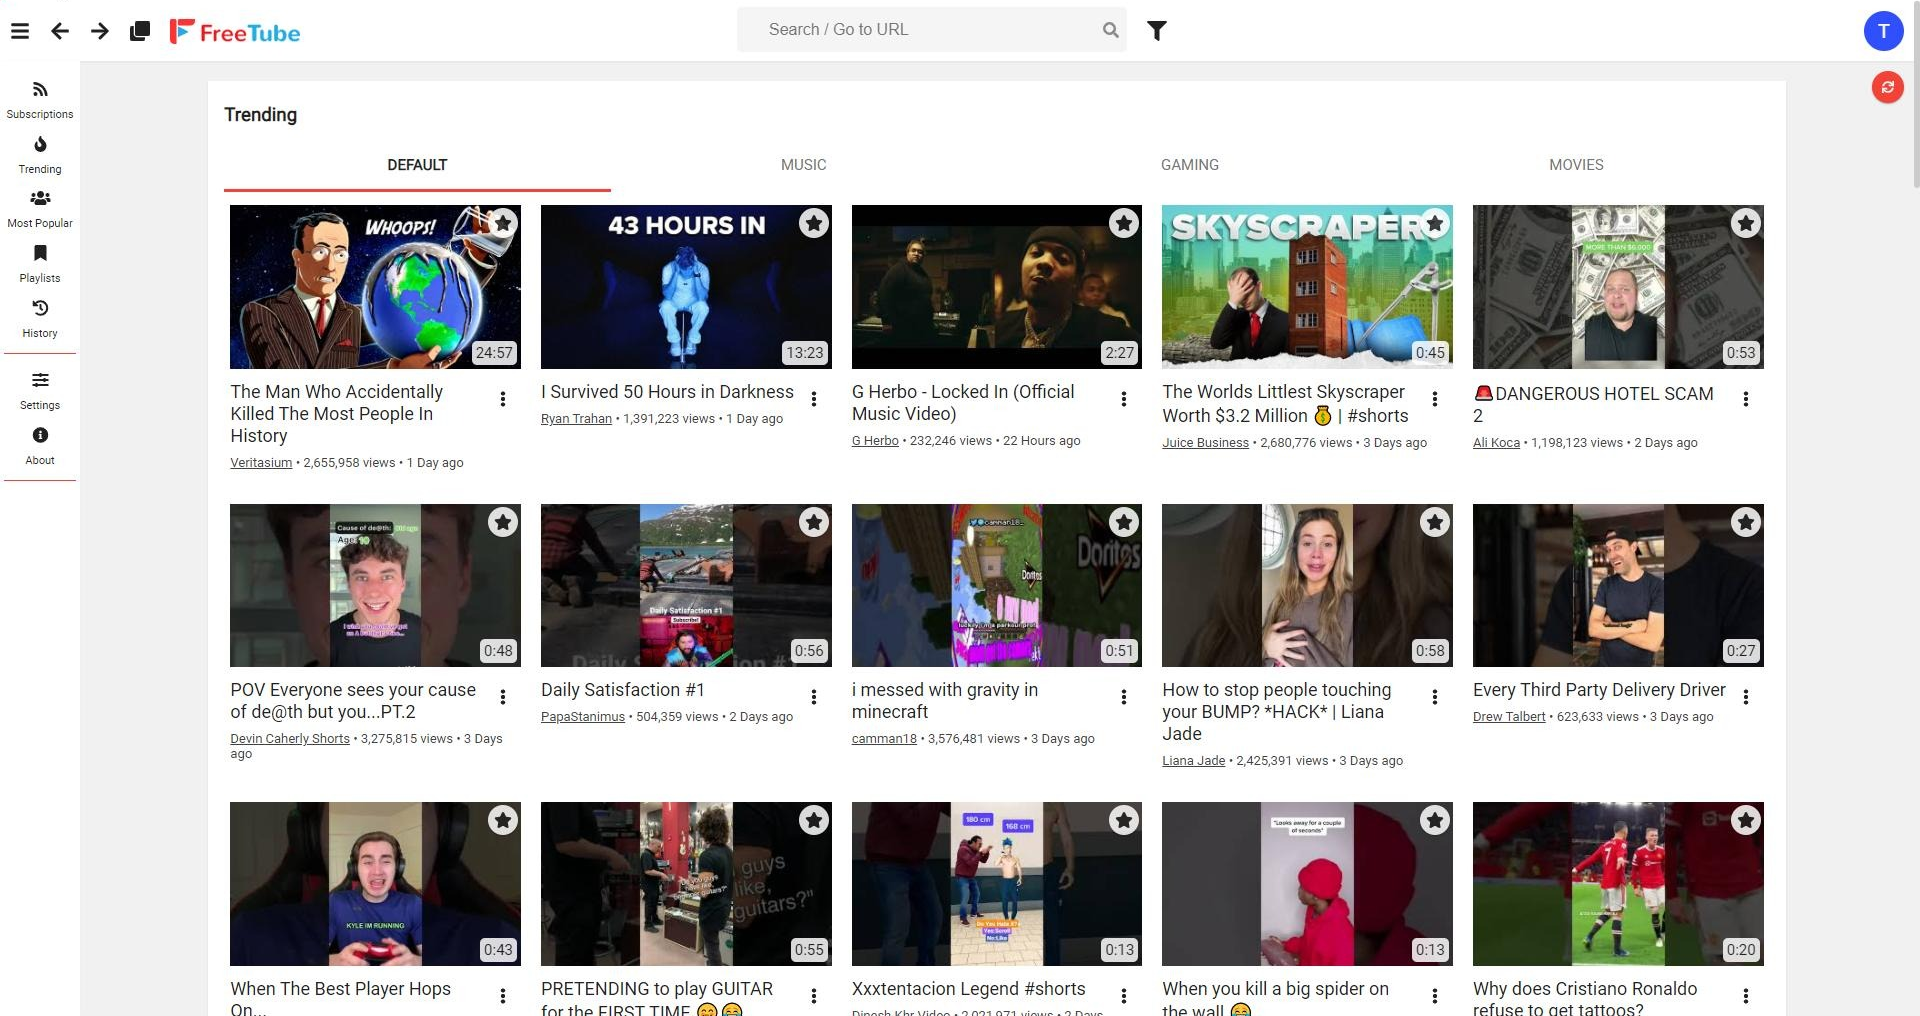 FreeTube's Latest Subscriptions using the grid view